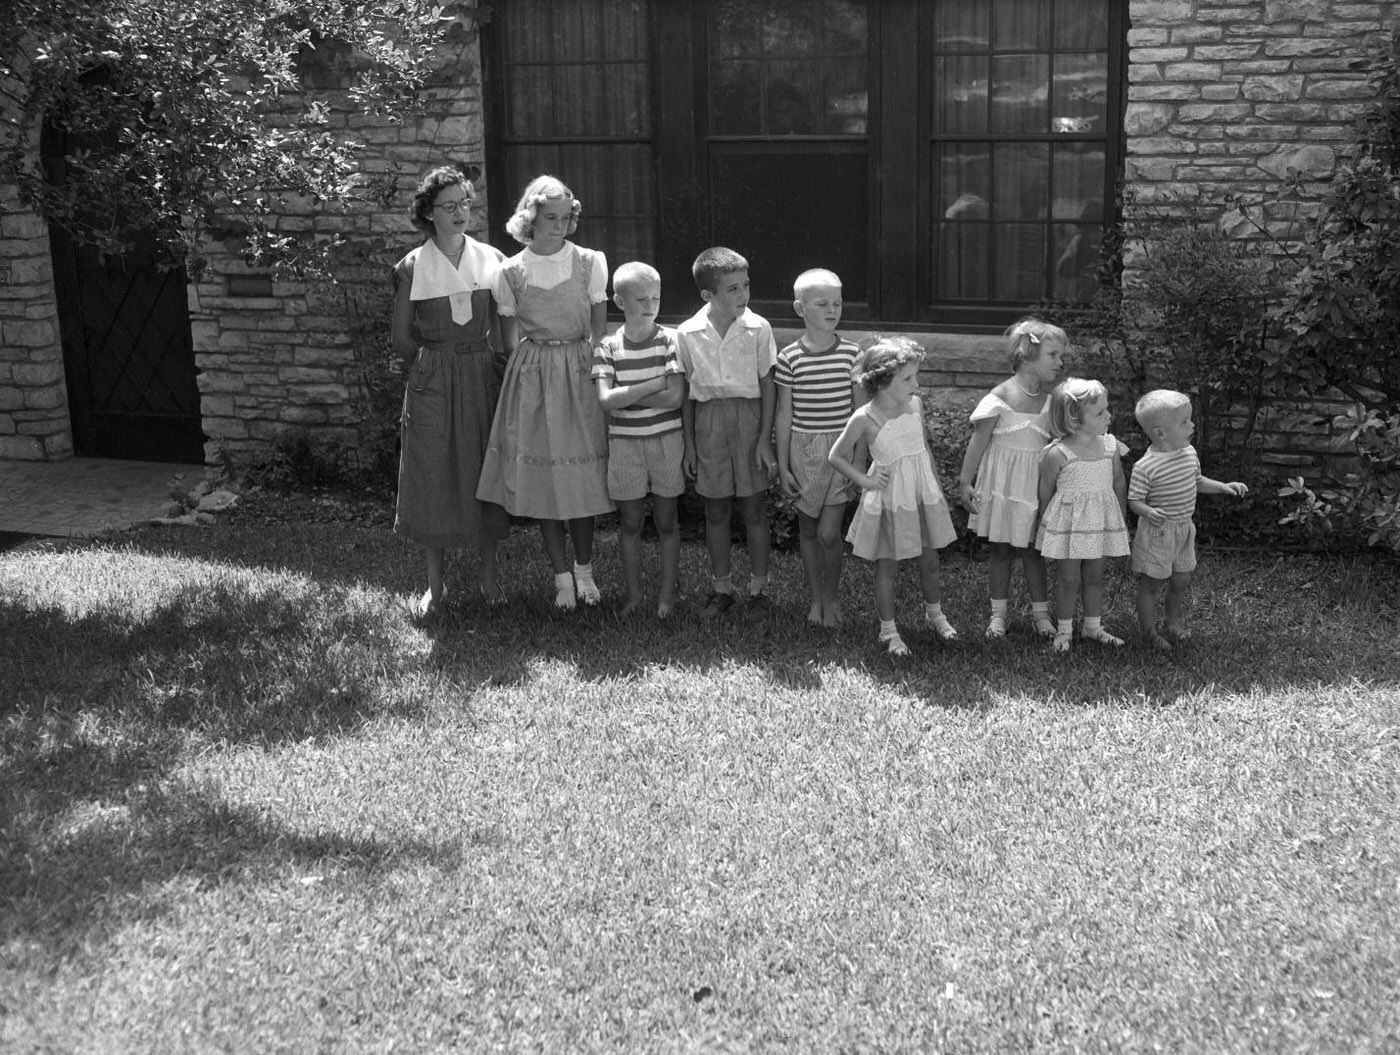 Youth of the Patterson Family Group Portrait, 1951.